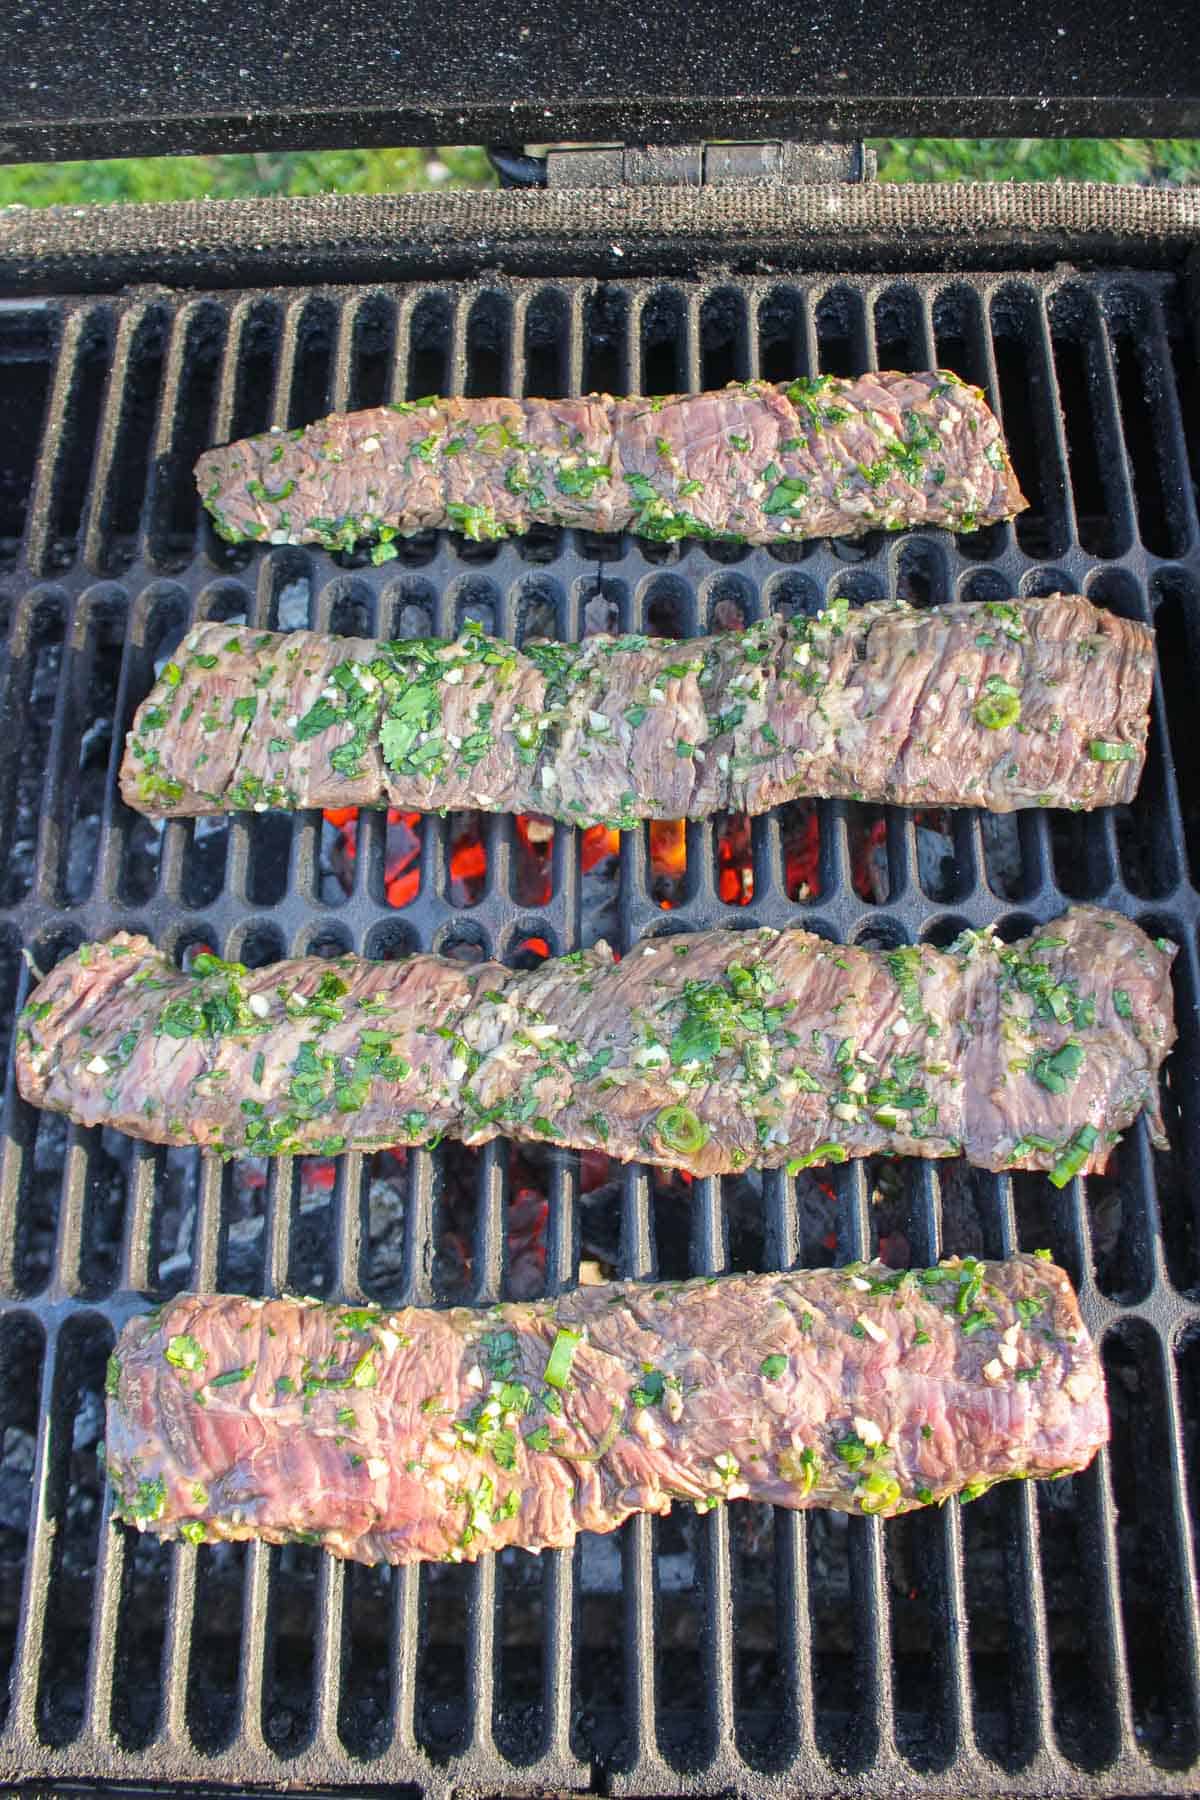 Adding the raw steaks to the grill.